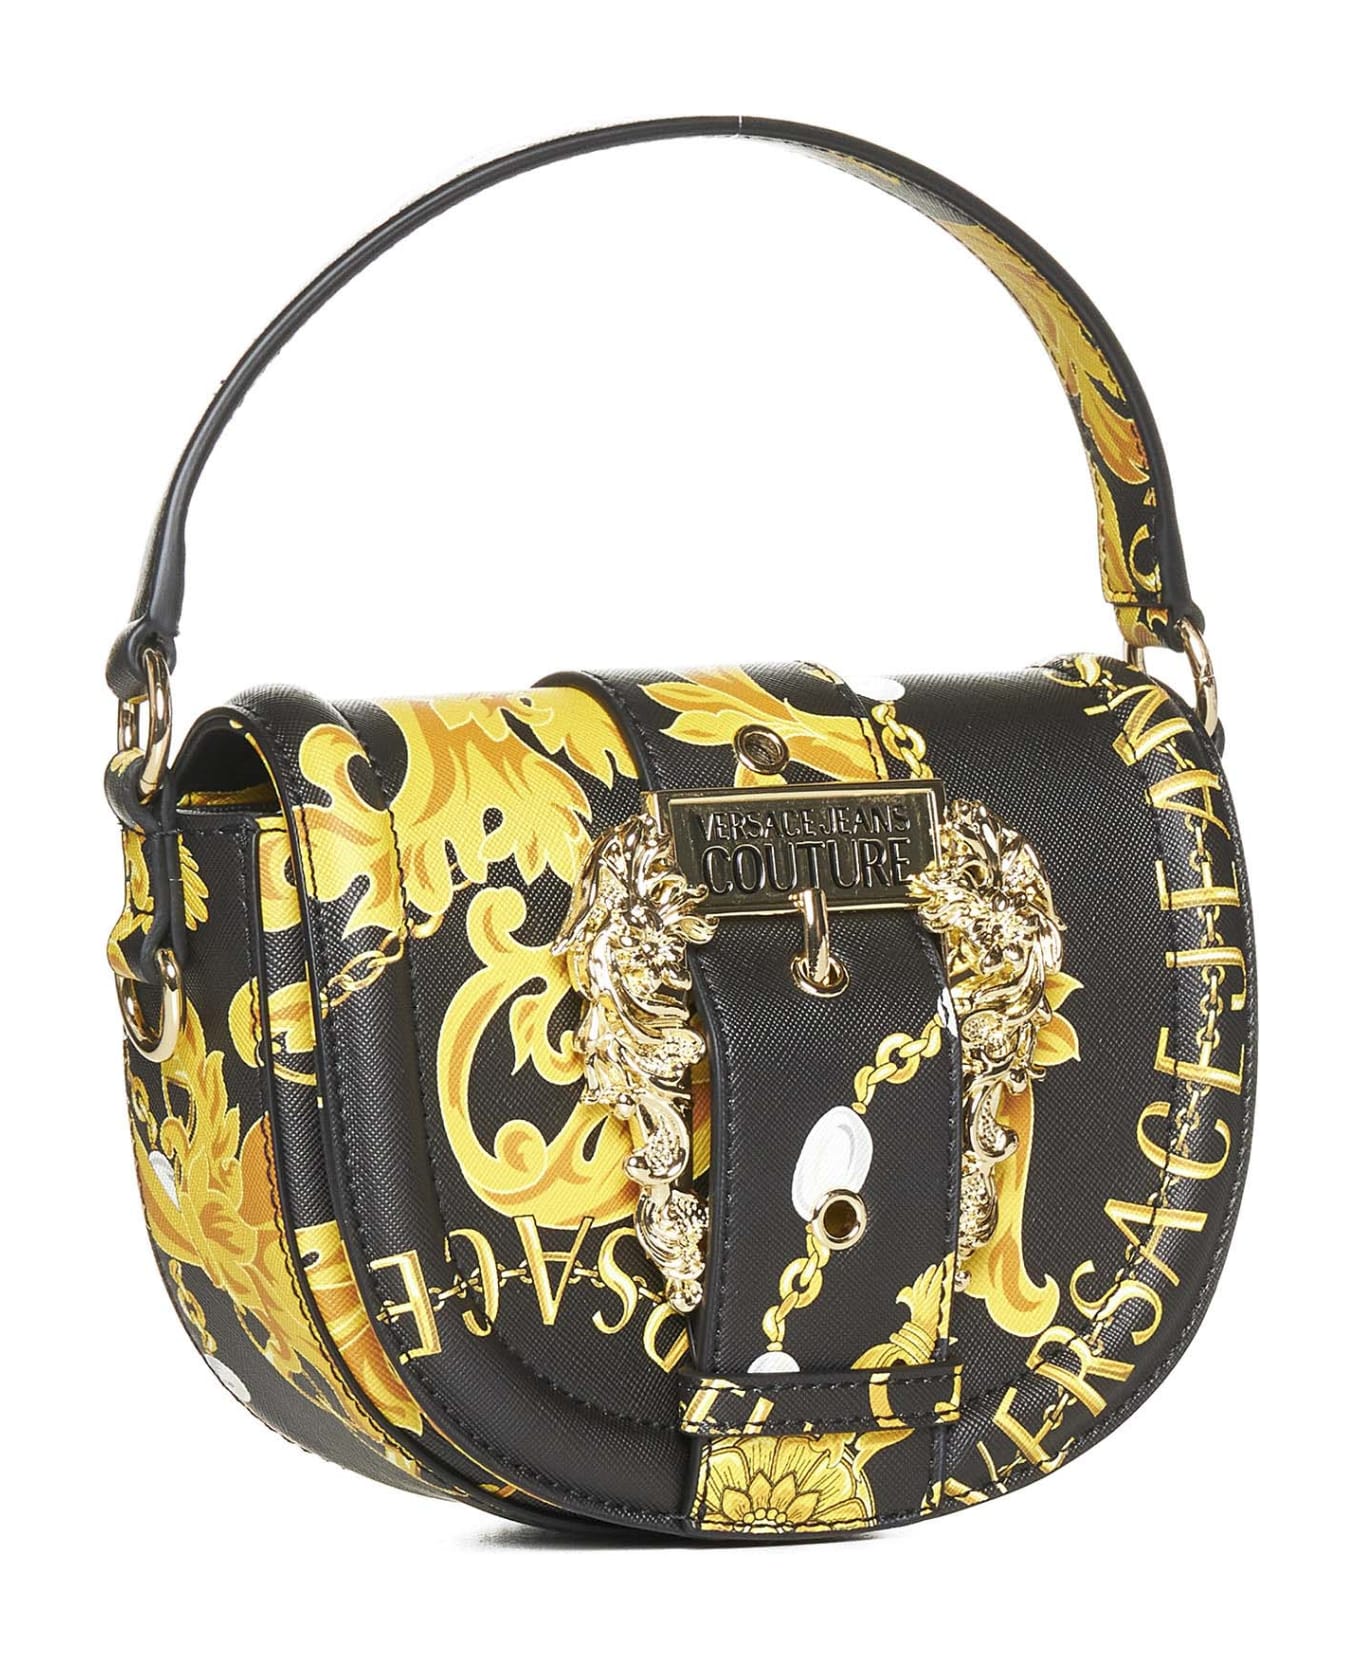 Versace Jeans Couture Bag - Black gold